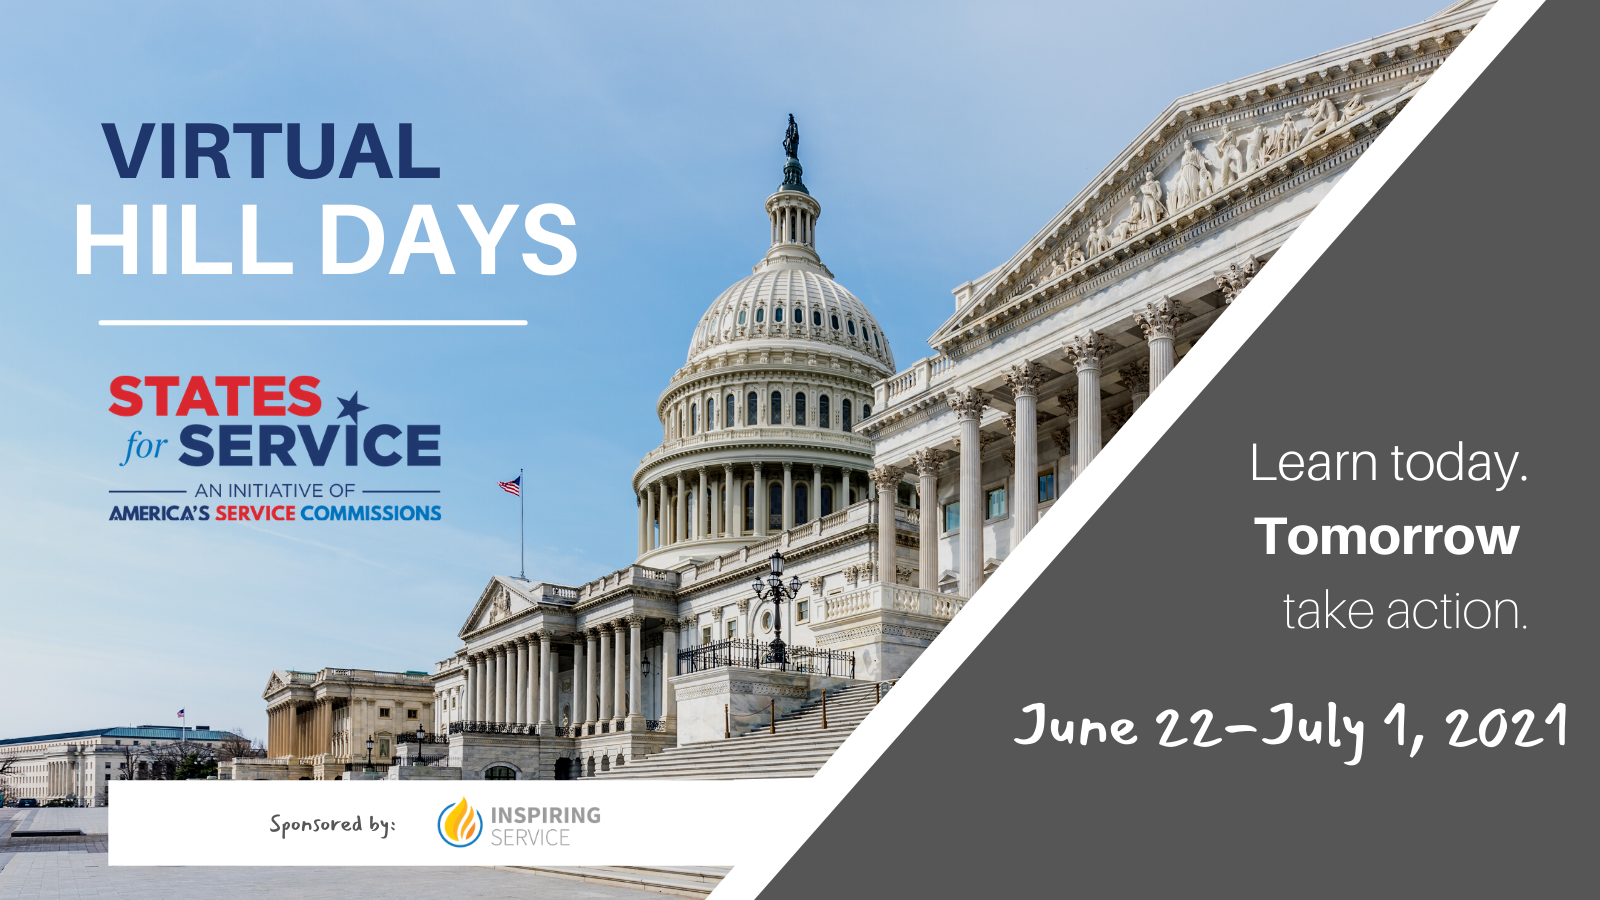 photo of Capitol building in DC. Text overly reads Virtual Hill Days. Learn today. Tomorrow take action. June 22 - July 1, 2021. Includes States for Service logo. Sponsored by Inspiring Service.